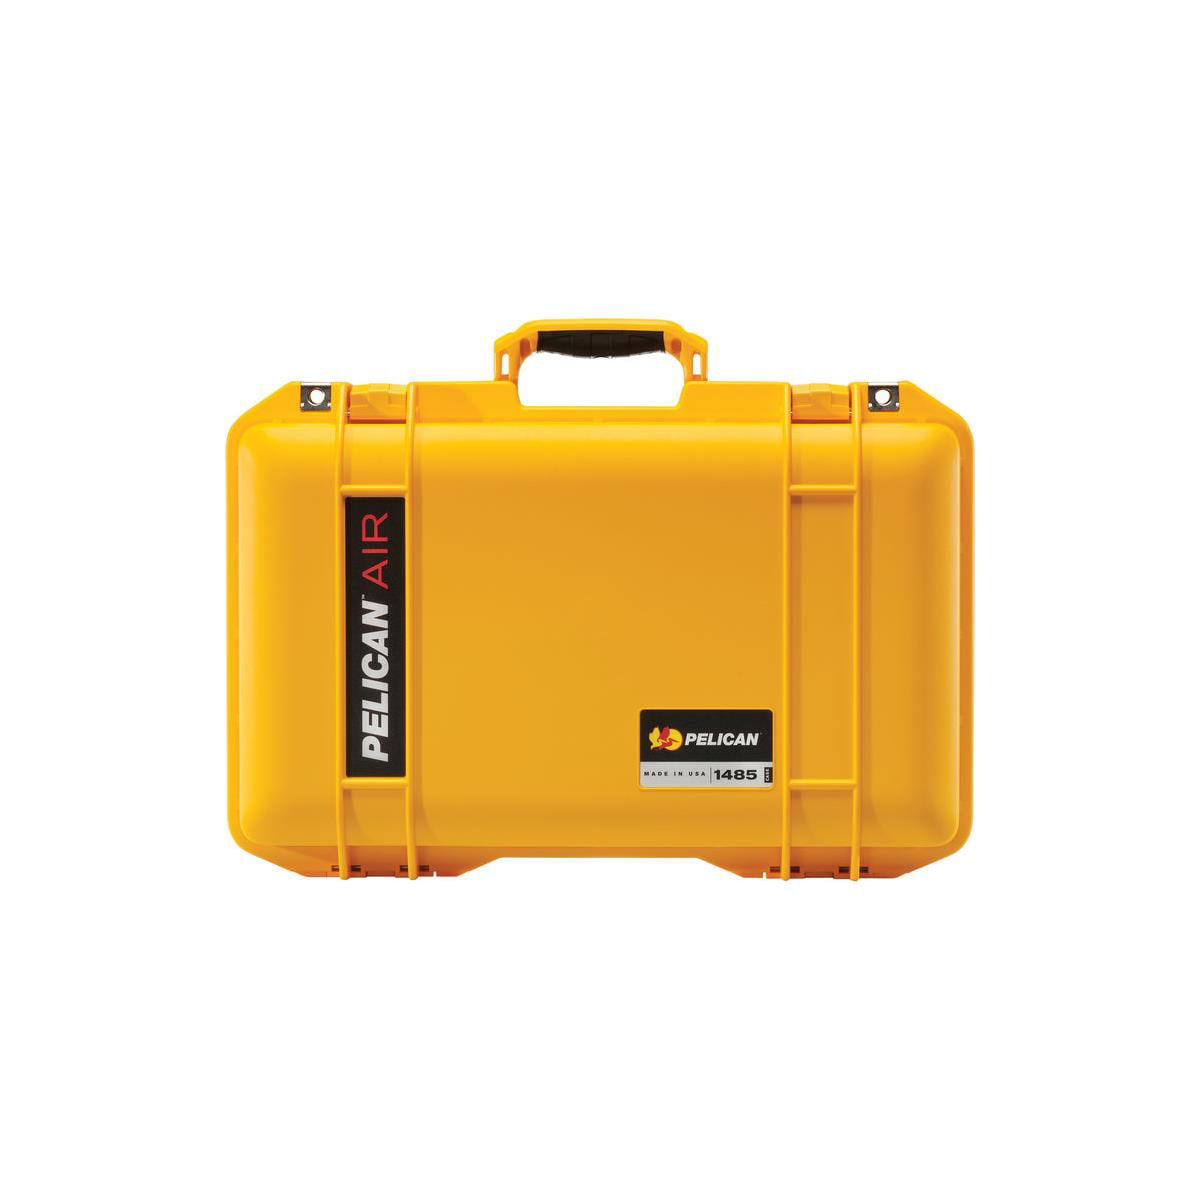 Pelican 1485 Air Compact Hand-Carry Case with Pick-N-Pluck Foam, Yellow